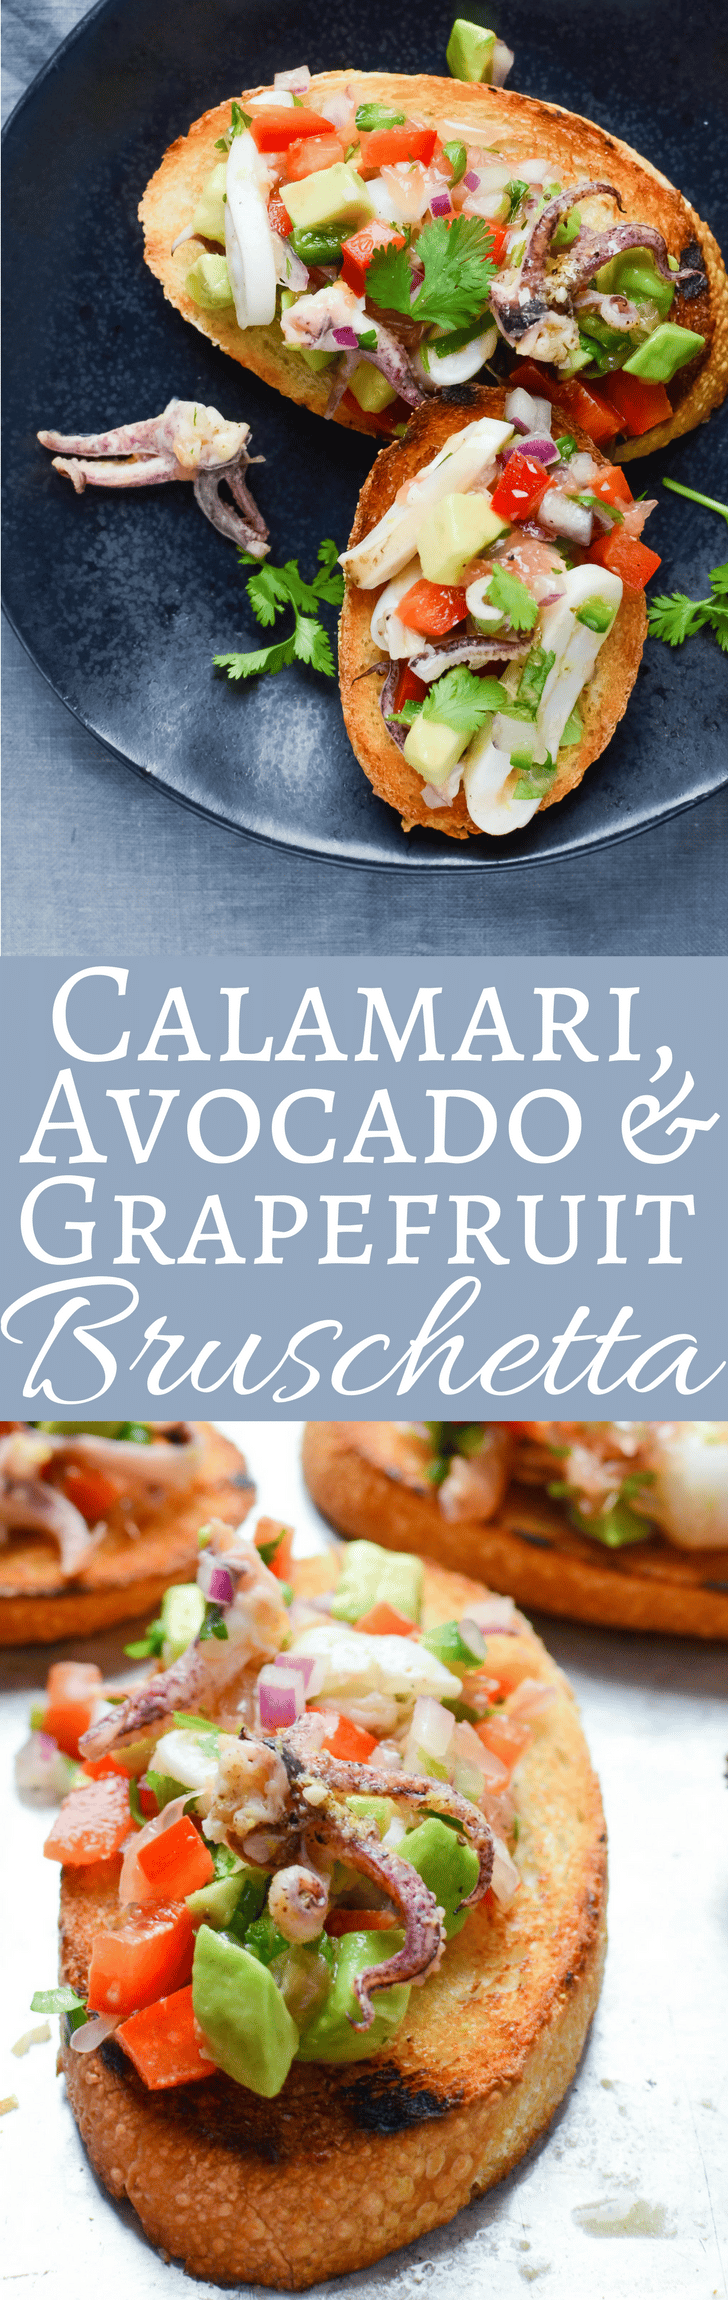 This easy seafood bruschetta recipe tastes like a trip to Mexico with grilled calamari, avocado and tangy grapefruit on toasted bread! Great with a Margarita!